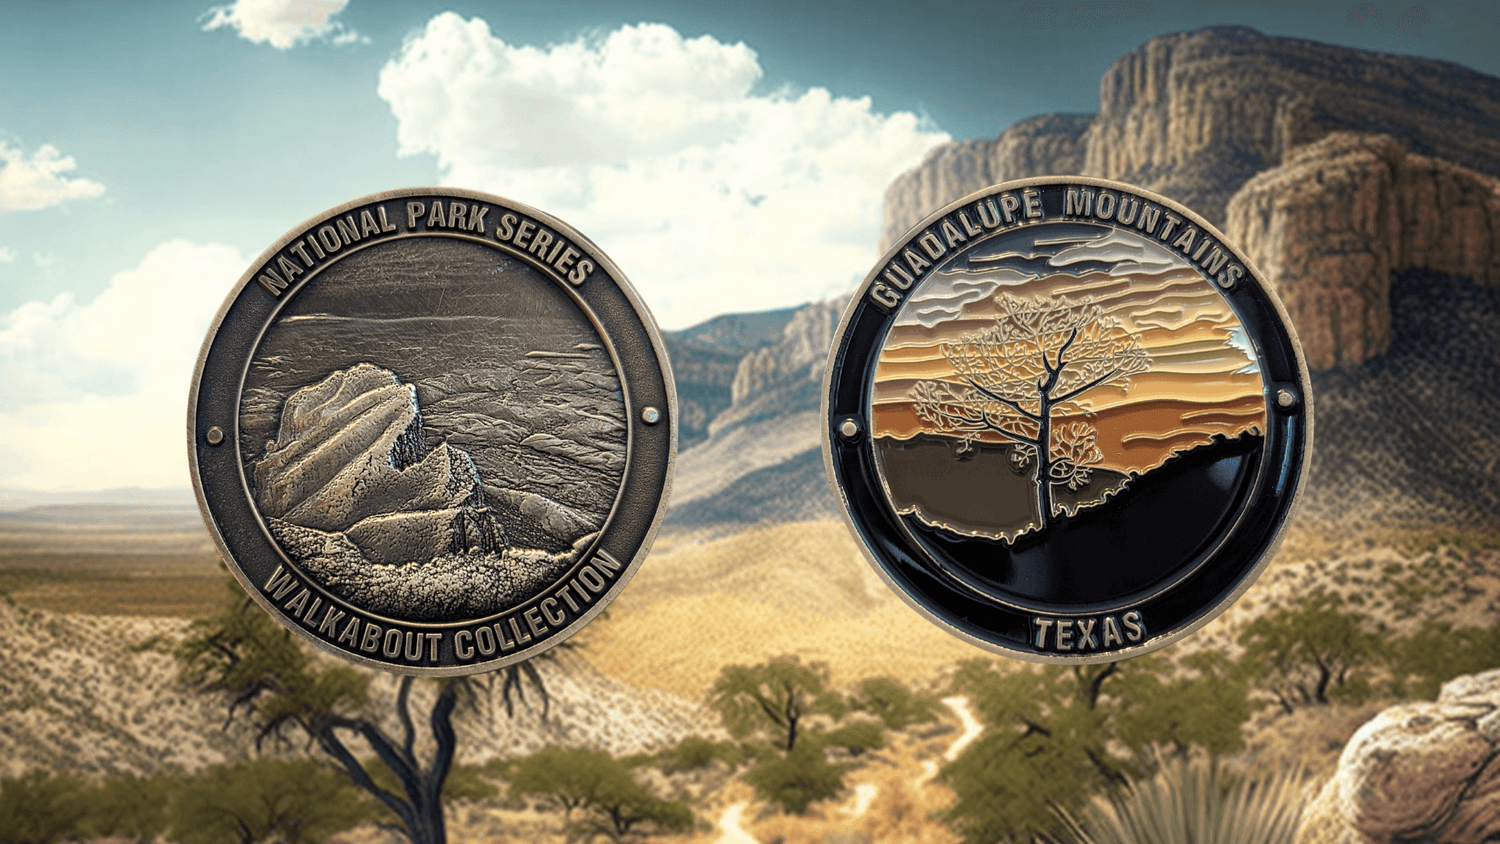 GUADALUPE MOUNTAINS NATIONAL PARK CHALLENGE COIN